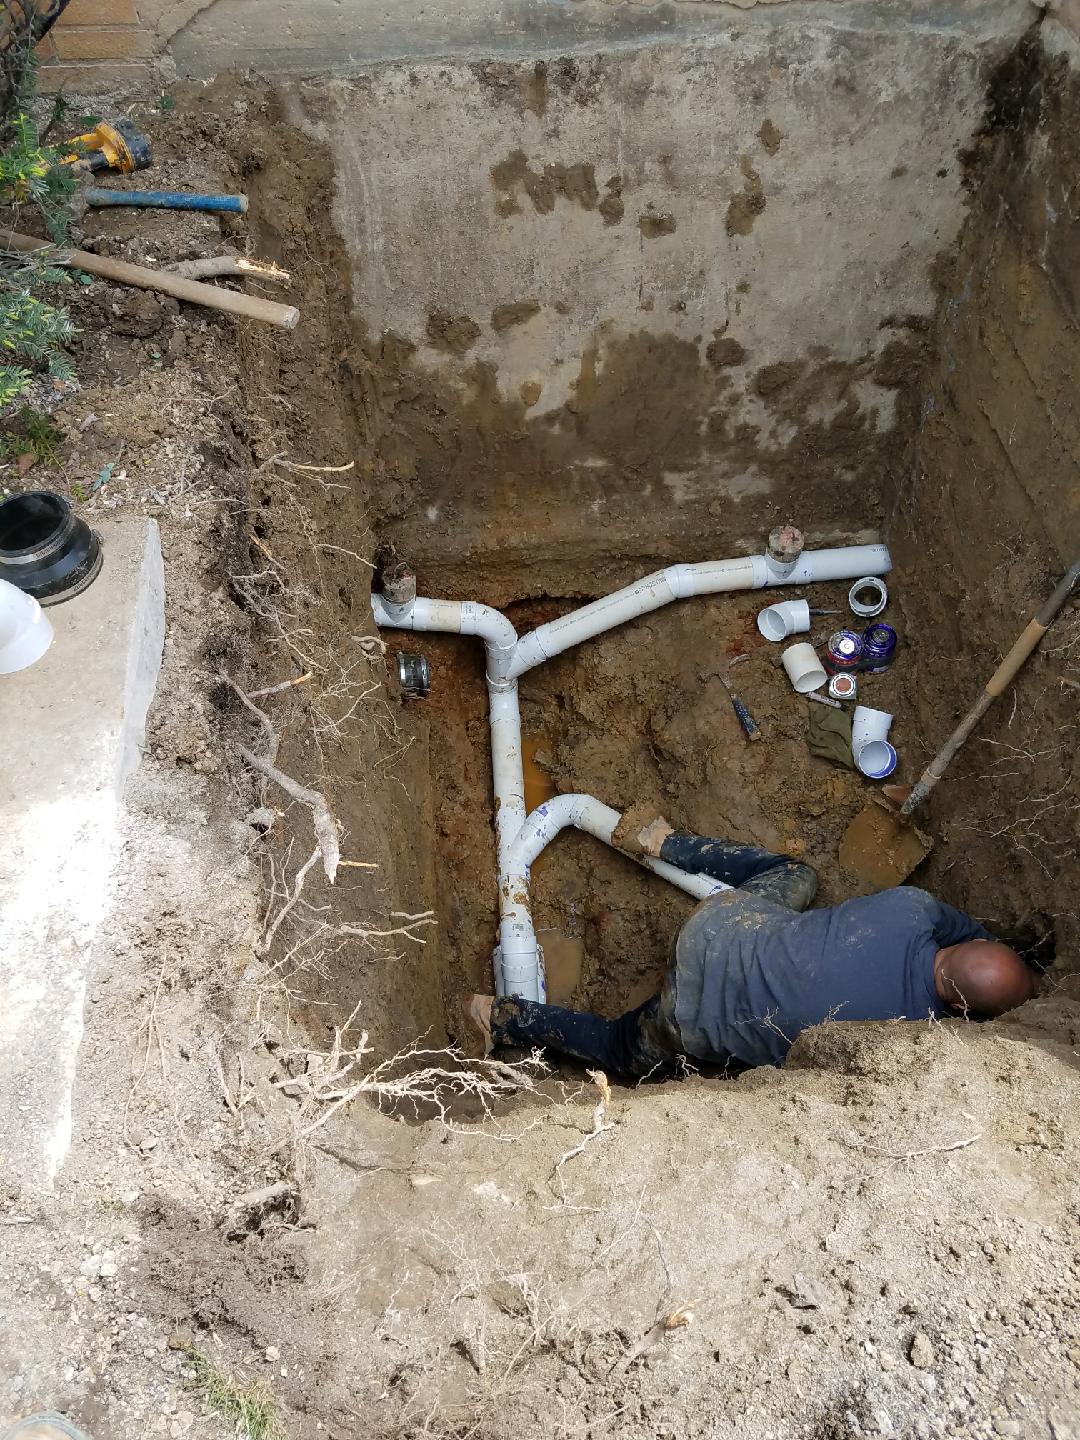 basement sewer line lateral connection water waterproofing problem repaired around workers construction phone call problems